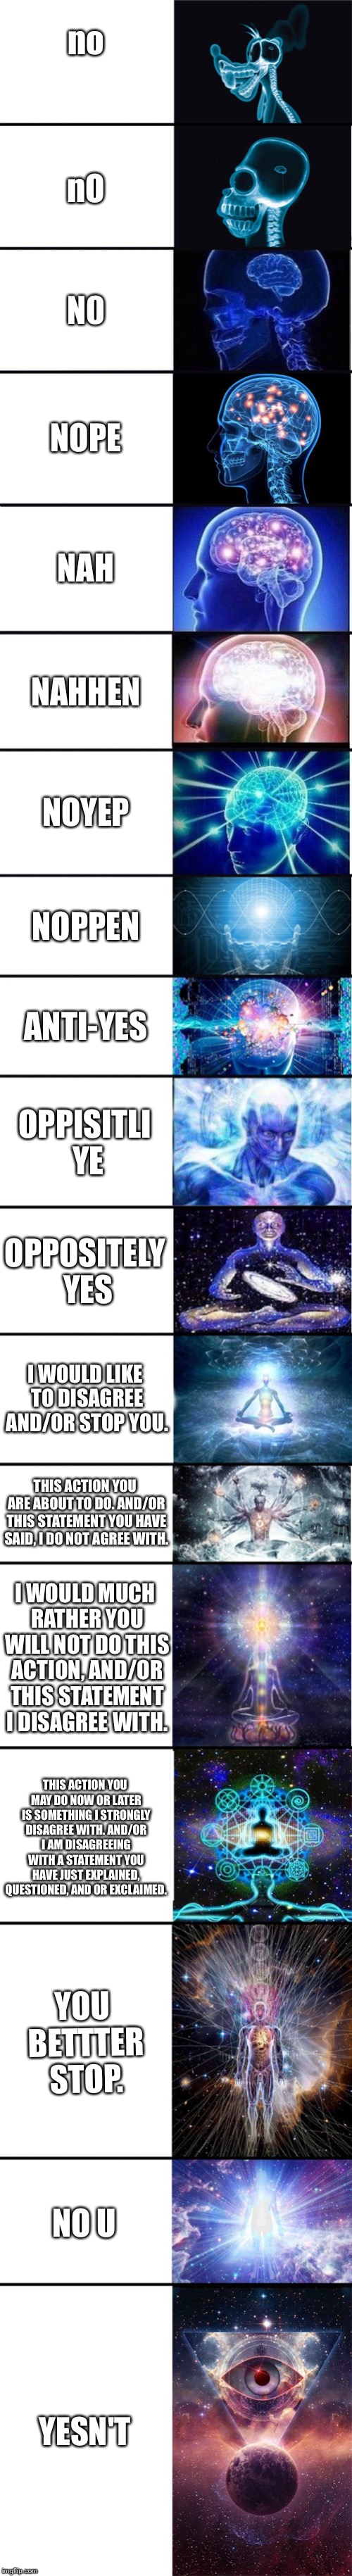 expanding brain: 9001 | no; nO; N0; NOPE; NAH; NAHHEN; NOYEP; NOPPEN; ANTI-YES; OPPISITLI YE; OPPOSITELY YES; I WOULD LIKE TO DISAGREE AND/OR STOP YOU. THIS ACTION YOU ARE ABOUT TO DO. AND/OR THIS STATEMENT YOU HAVE SAID, I DO NOT AGREE WITH. I WOULD MUCH RATHER YOU WILL NOT DO THIS ACTION, AND/OR THIS STATEMENT I DISAGREE WITH. THIS ACTION YOU MAY DO NOW OR LATER IS SOMETHING I STRONGLY DISAGREE WITH. AND/OR I AM DISAGREEING WITH A STATEMENT YOU HAVE JUST EXPLAINED, QUESTIONED, AND OR EXCLAIMED. YOU BETTTER STOP. NO U; YESN'T | image tagged in expanding brain 9001 | made w/ Imgflip meme maker